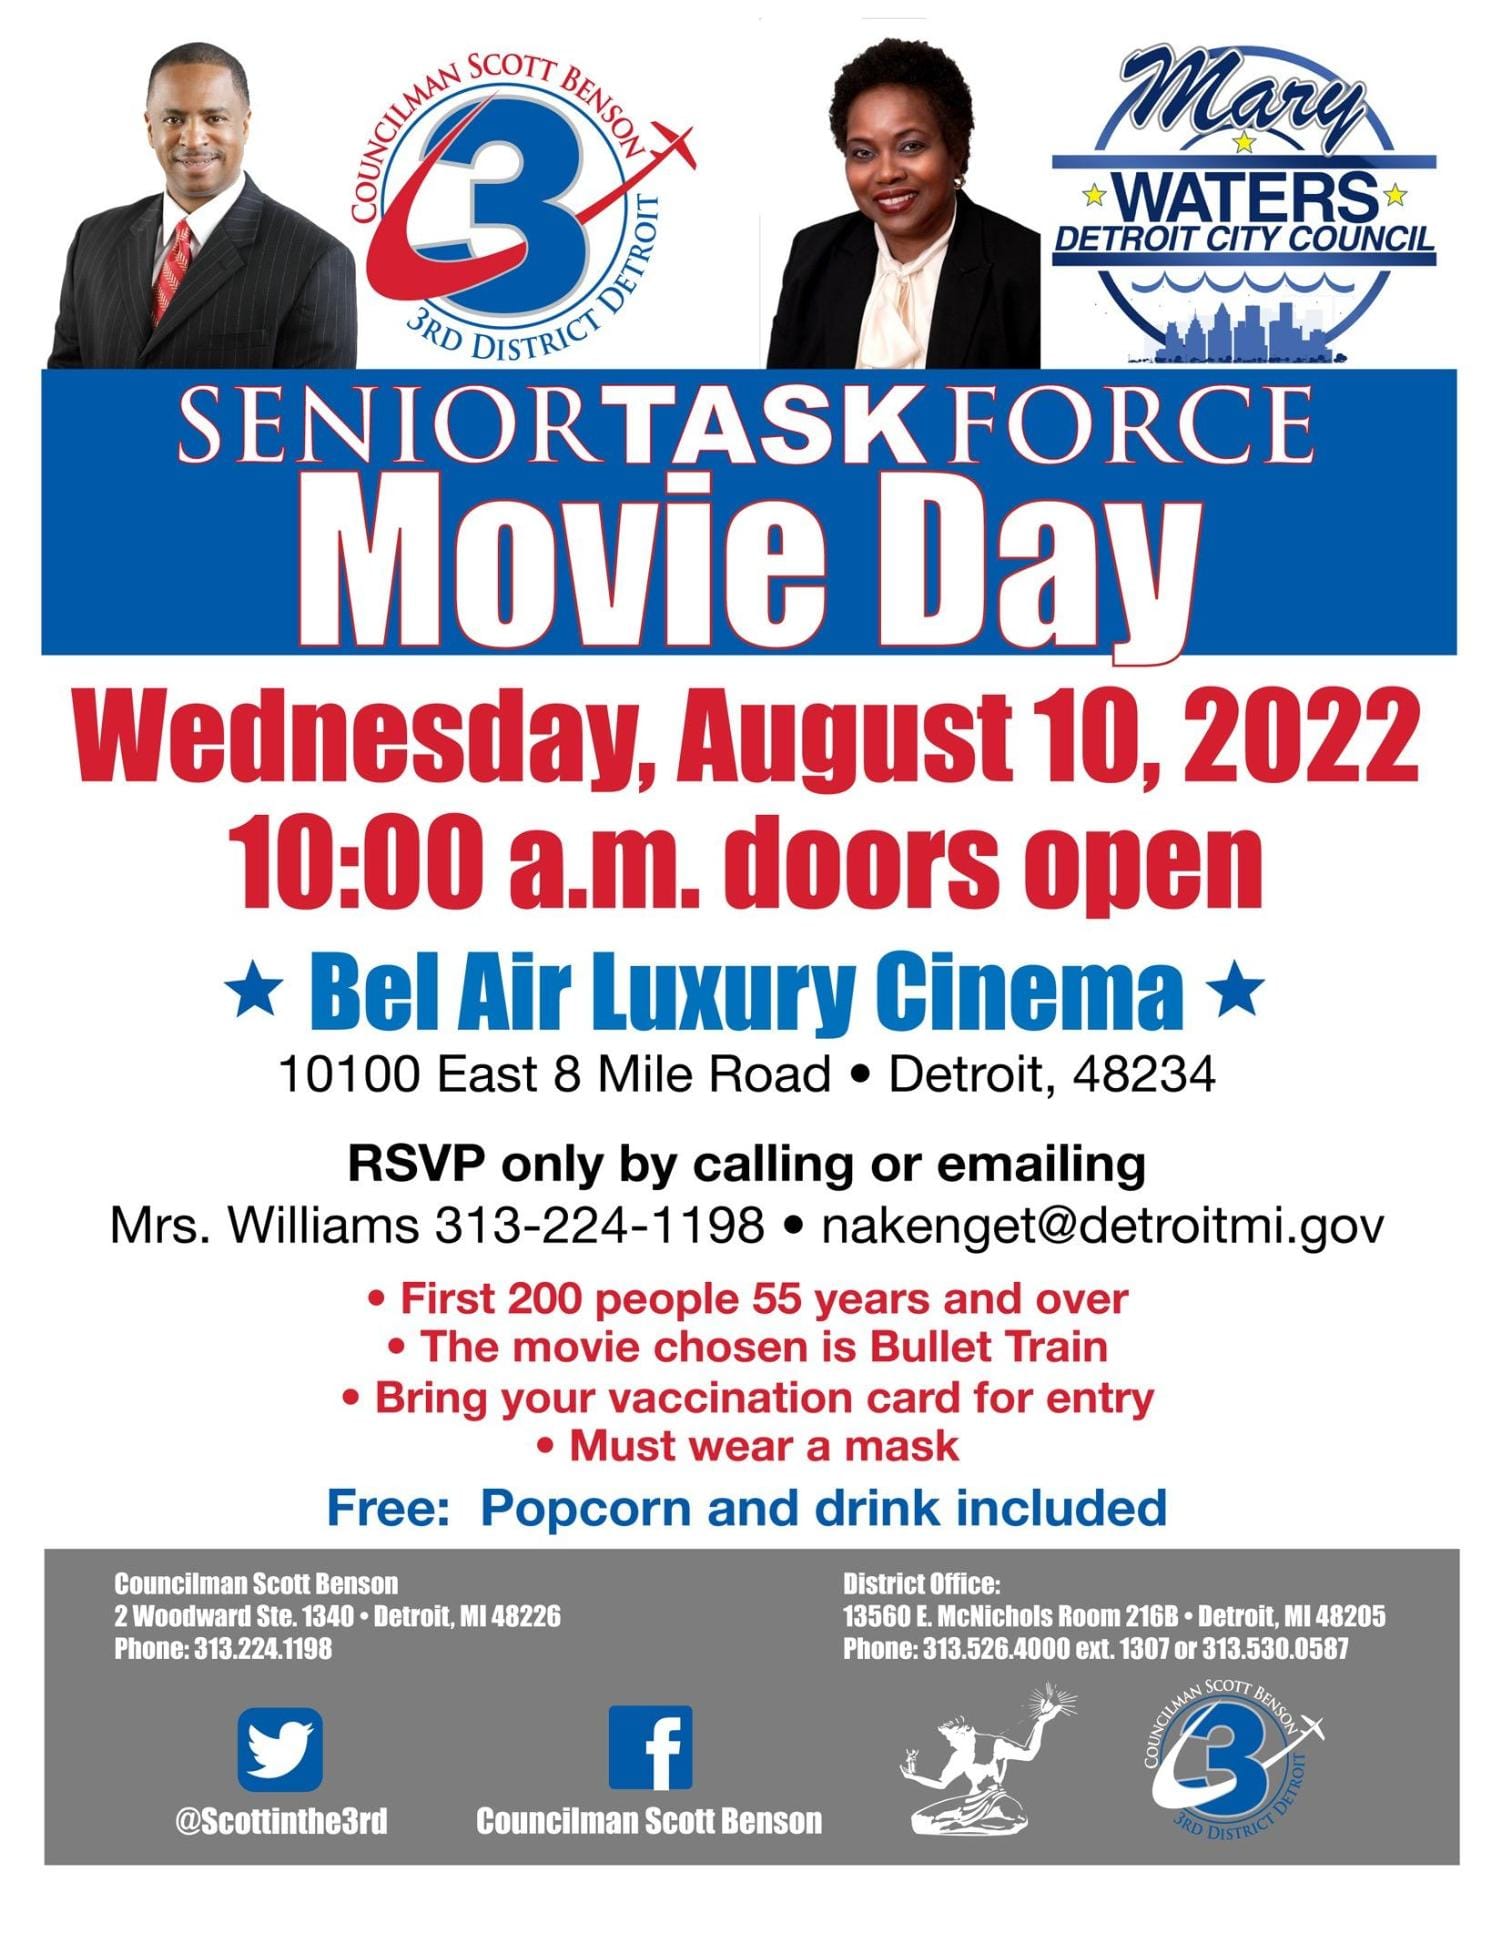 flyer of the senior task foce movie day event.